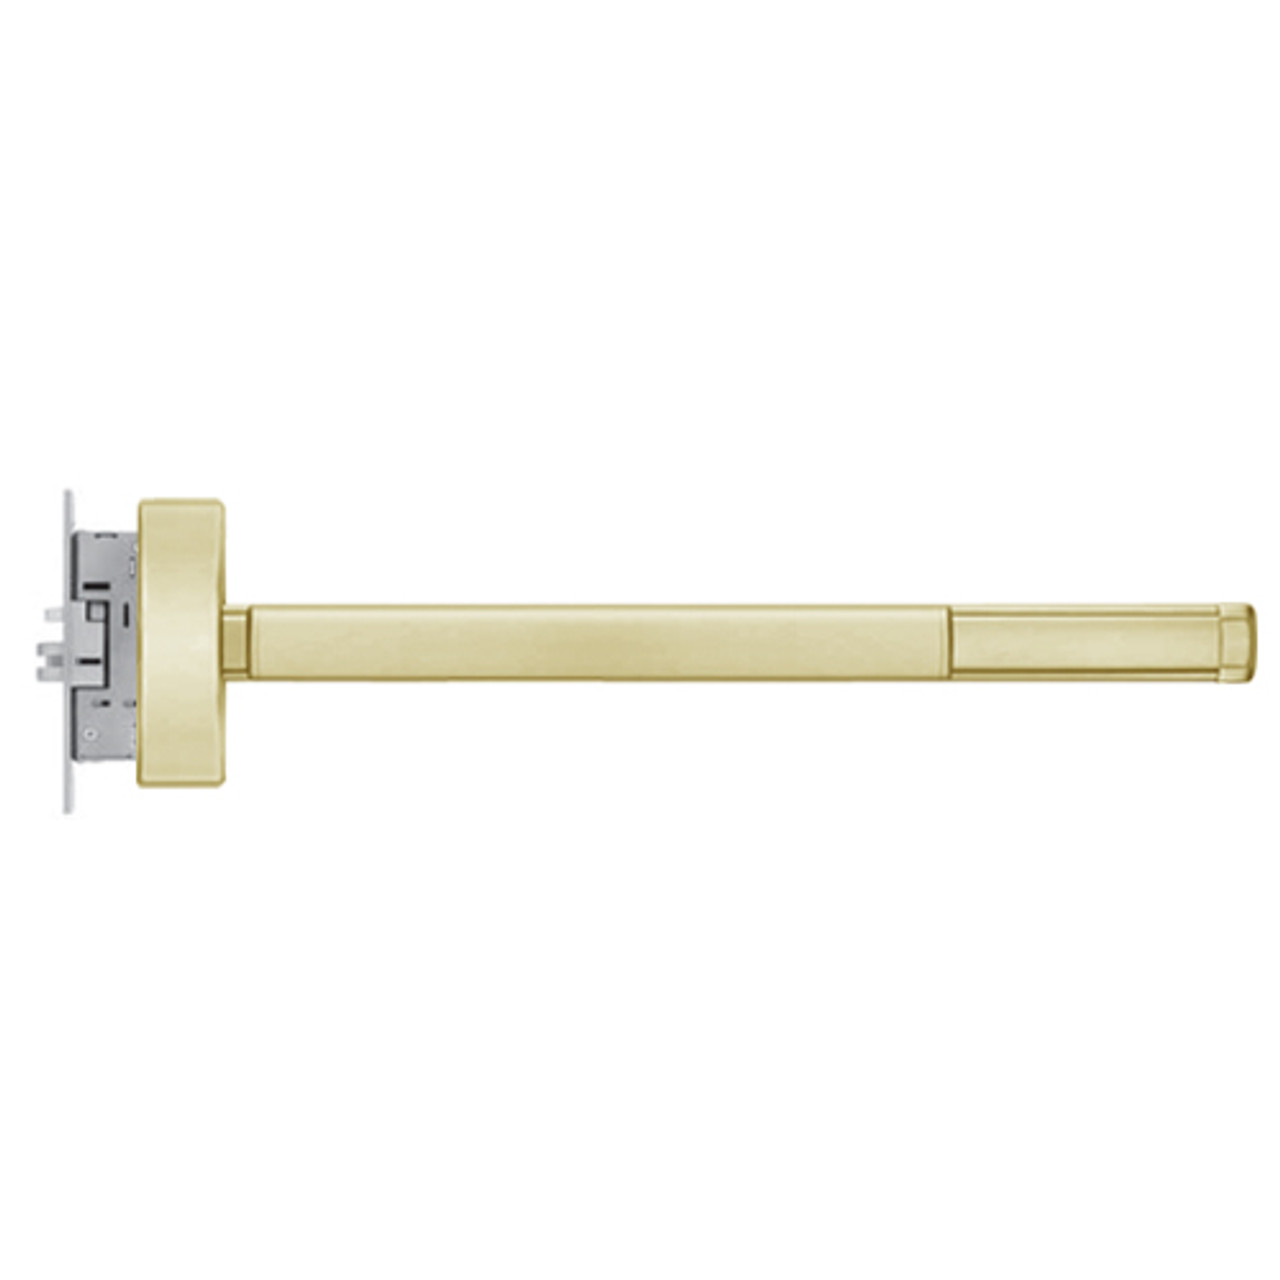 TSFL2305-LHR-606-36 PHI 2300 Series Fire Rated Apex Mortise Exit Device with Touchbar Monitoring Switch Prepped for Key Controls Thumb Piece in Satin Brass Finish